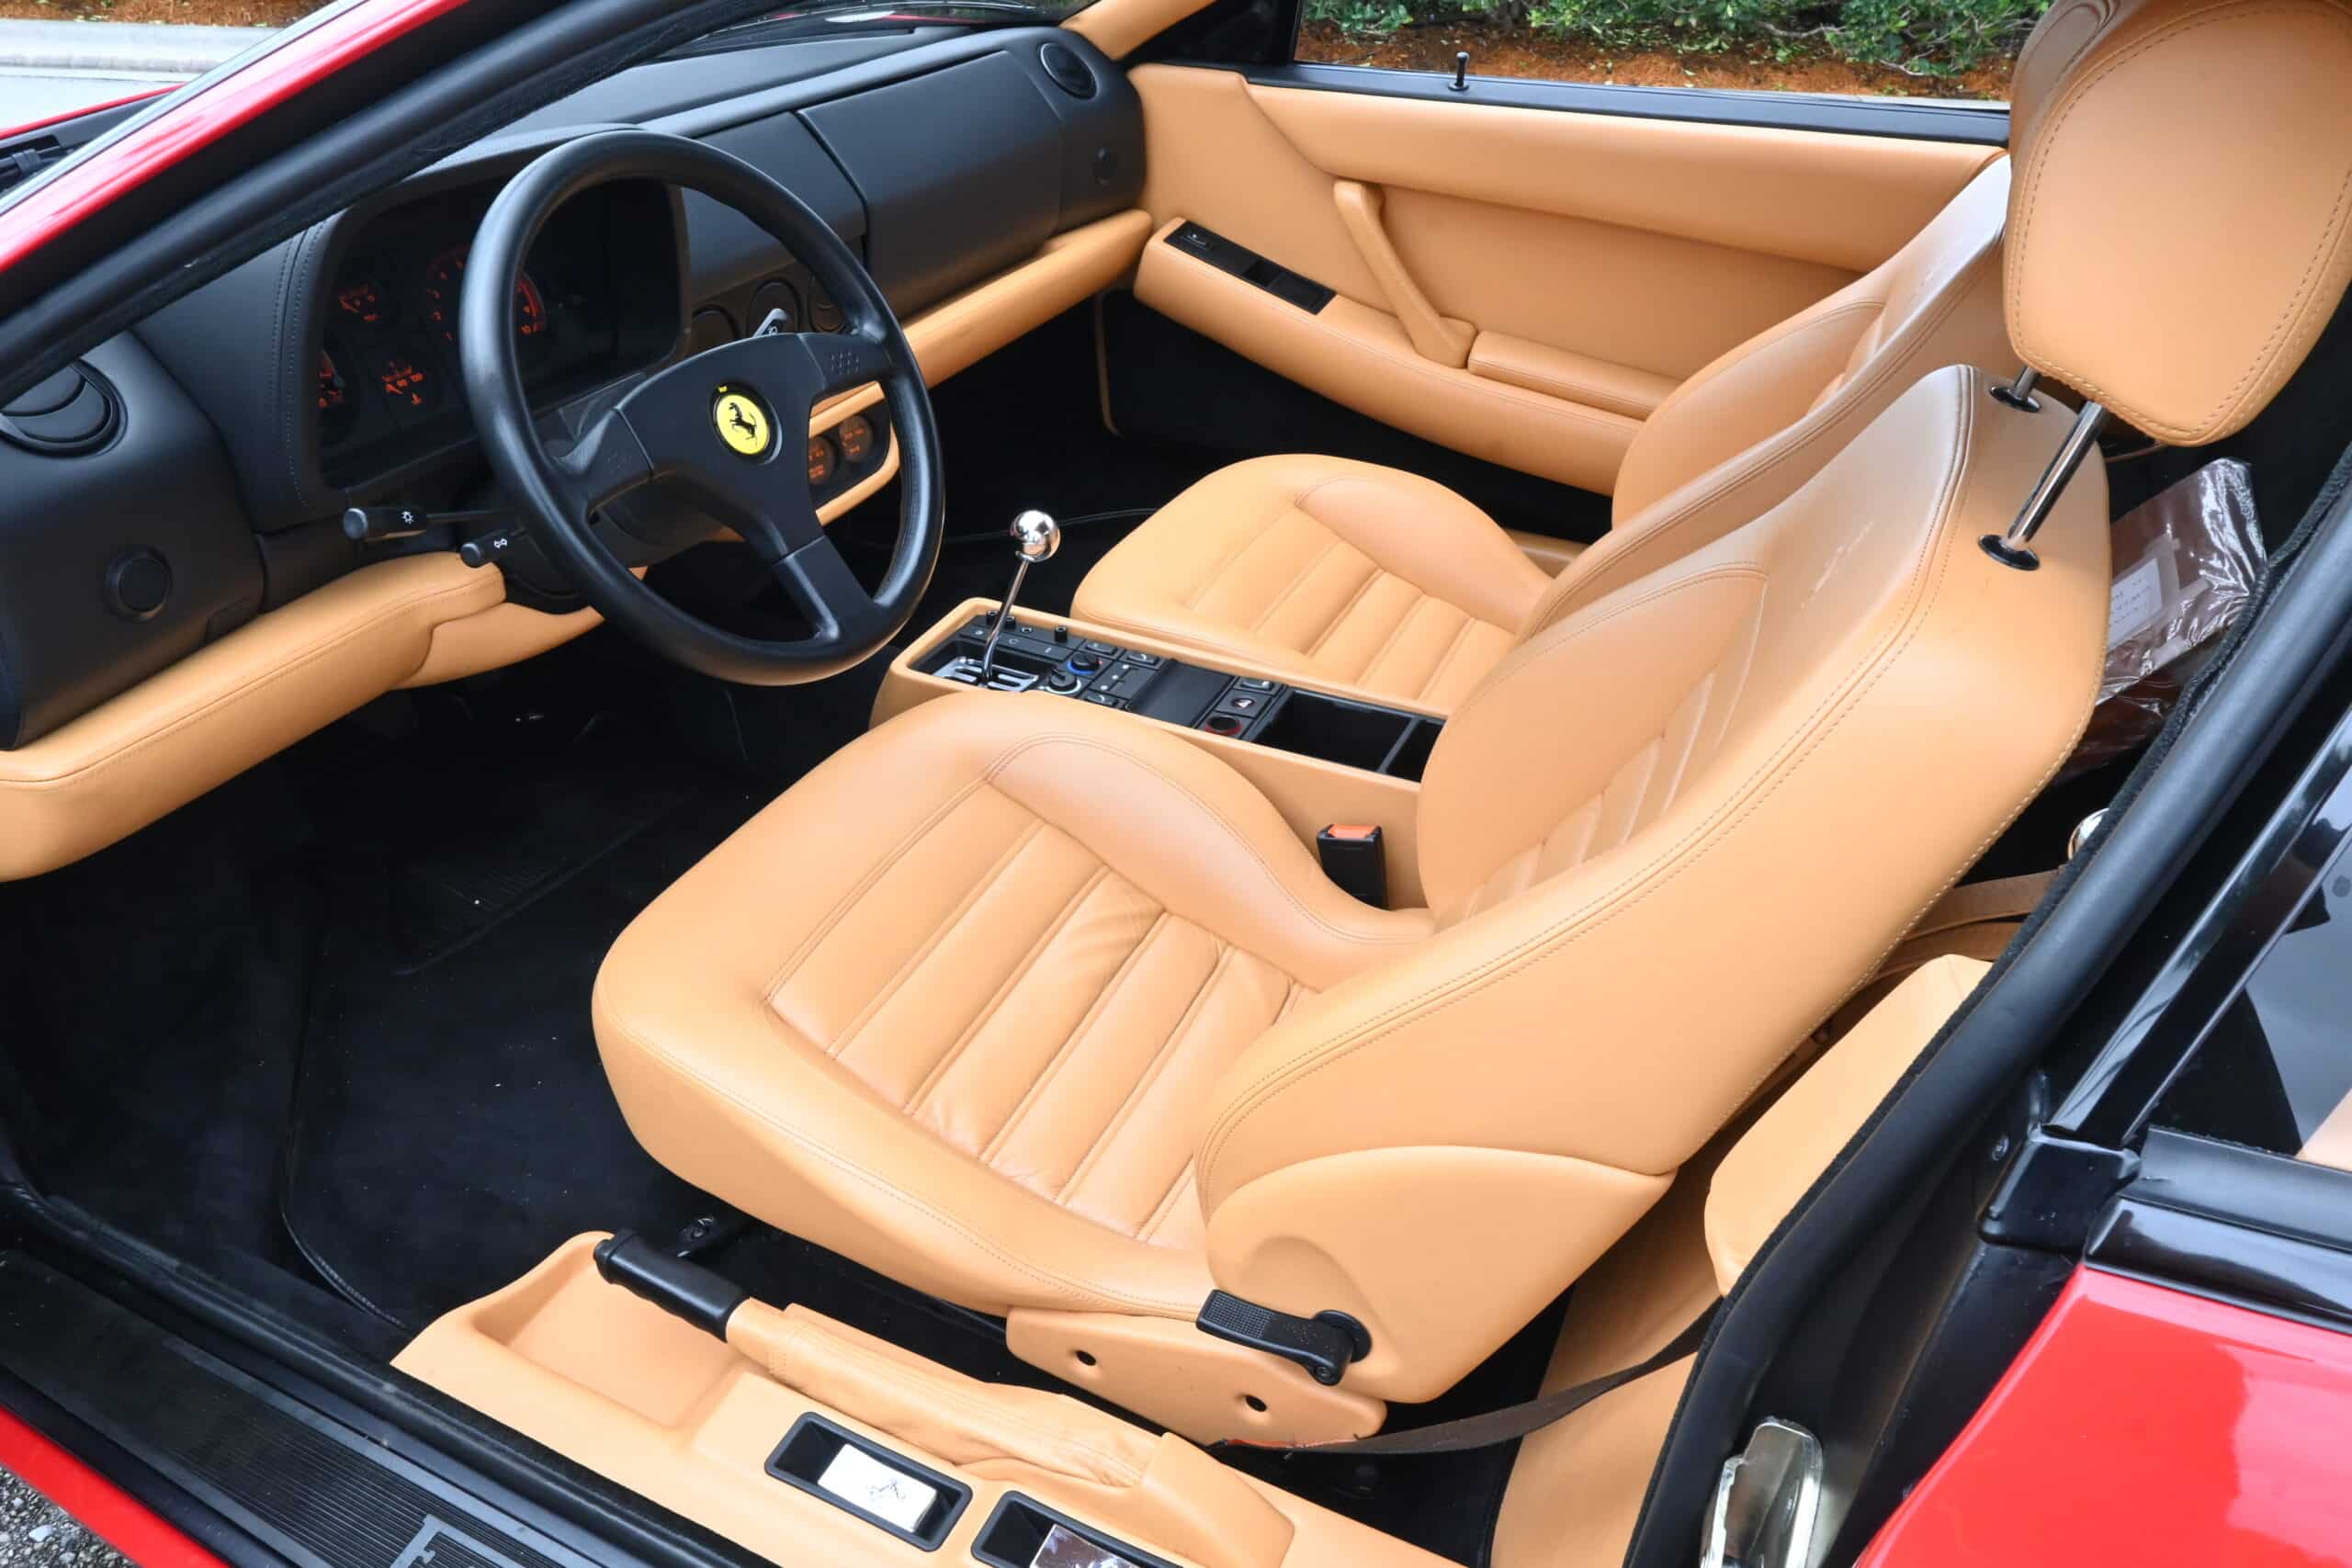 1994 Ferrari 512TR ABS, reported to be Ferrari Suisse promotional car, and one of 78 units ABS TRs made, belt service just done, all original, service history since new, Swiss Ferrari Collector owned